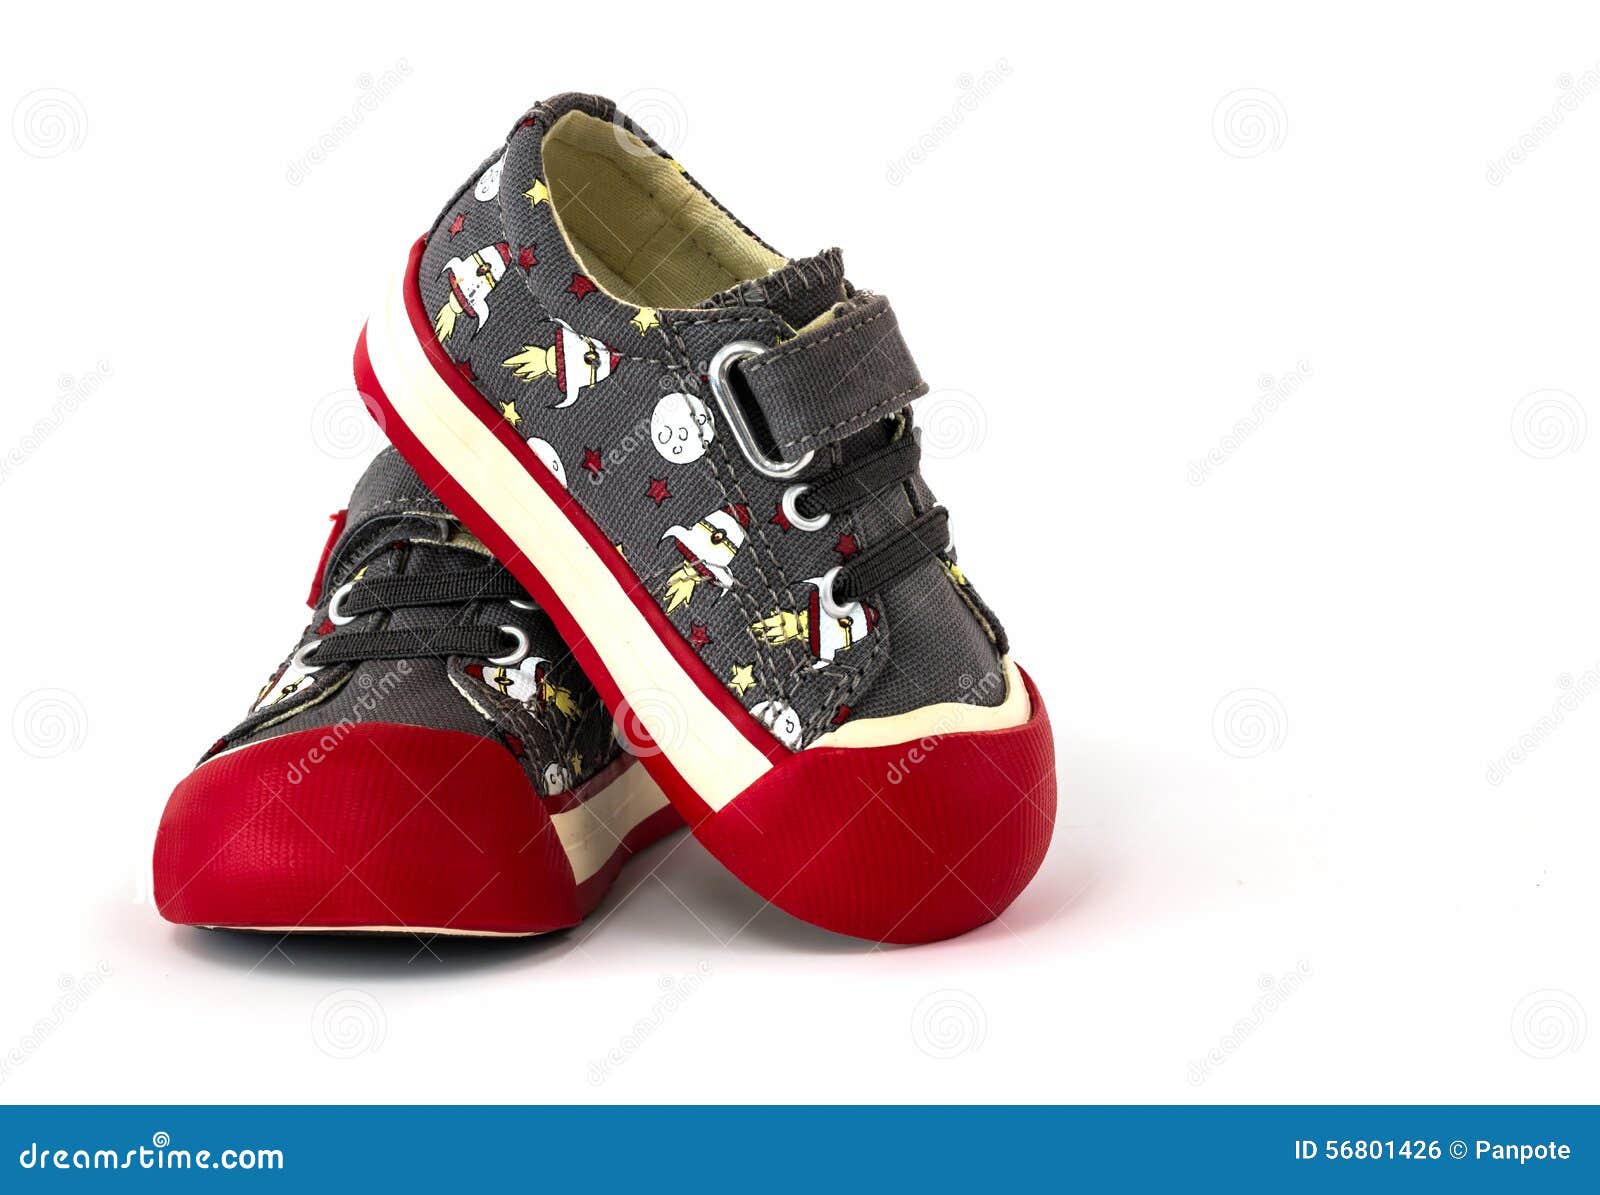 Kid s sneaker shoe stock photo. Image of isolated, small - 56801426